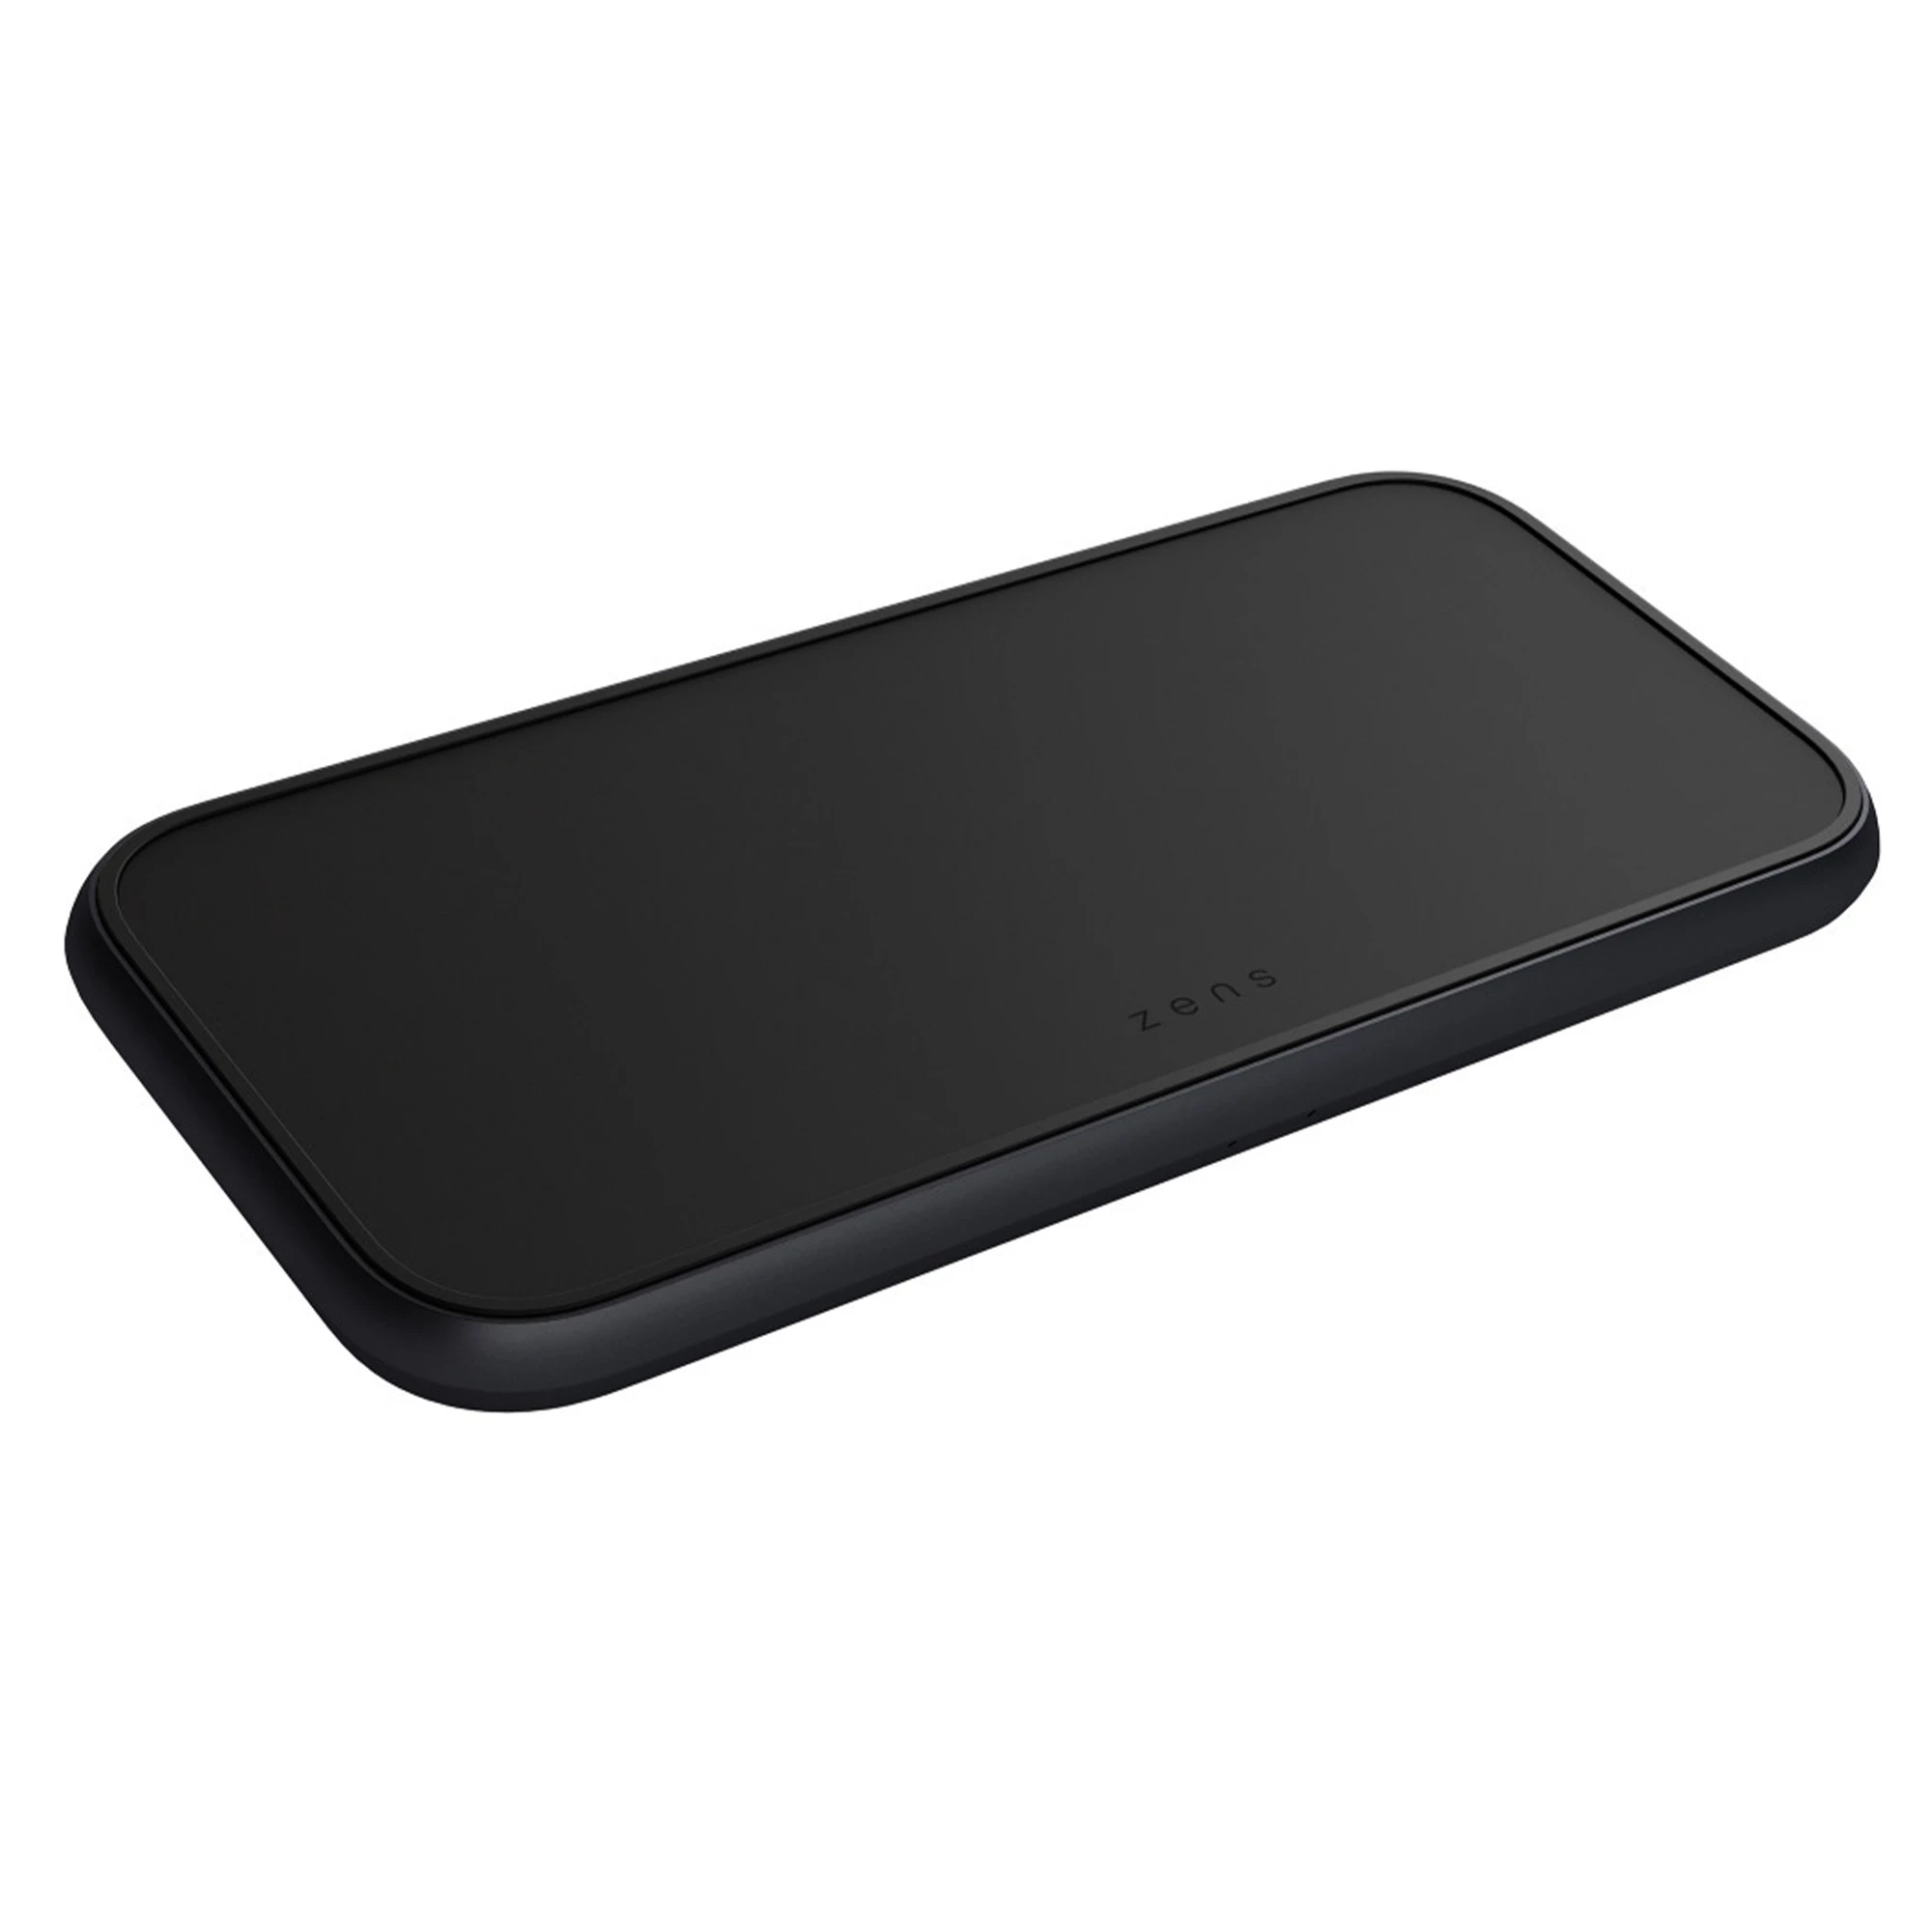 Zens Dual 5 Coil Aluminium Wireless Charger Black with USB-C 45W PD Wall Charger (ZEDC11B/00)